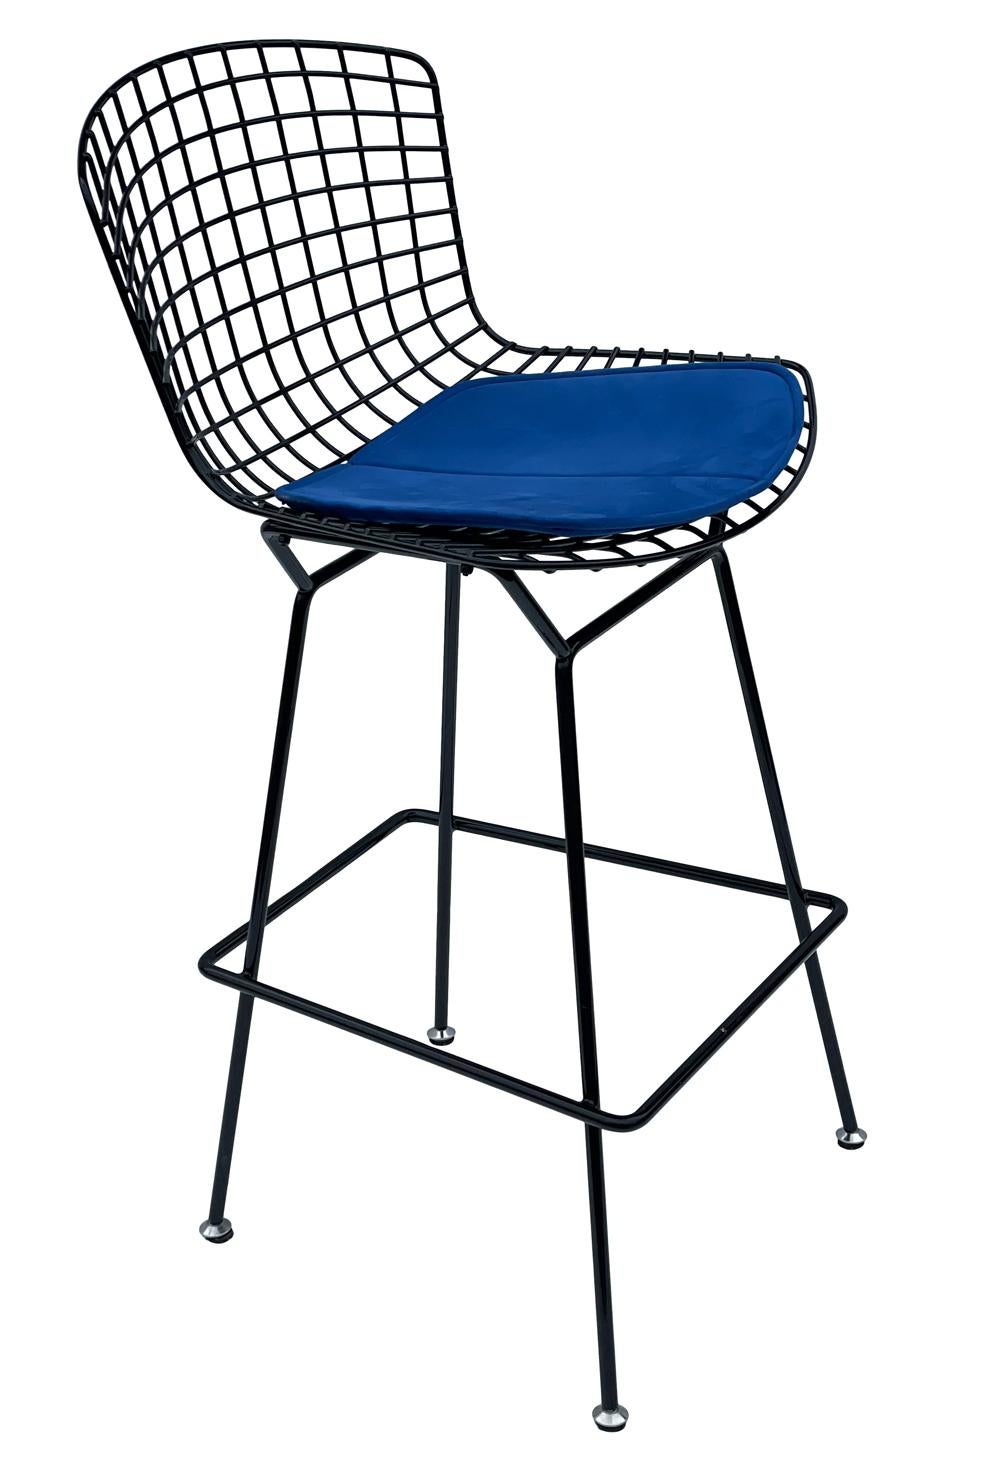 American Mid-Century Modern Black Wire Bar Stool by Harry Bertoia for Knoll